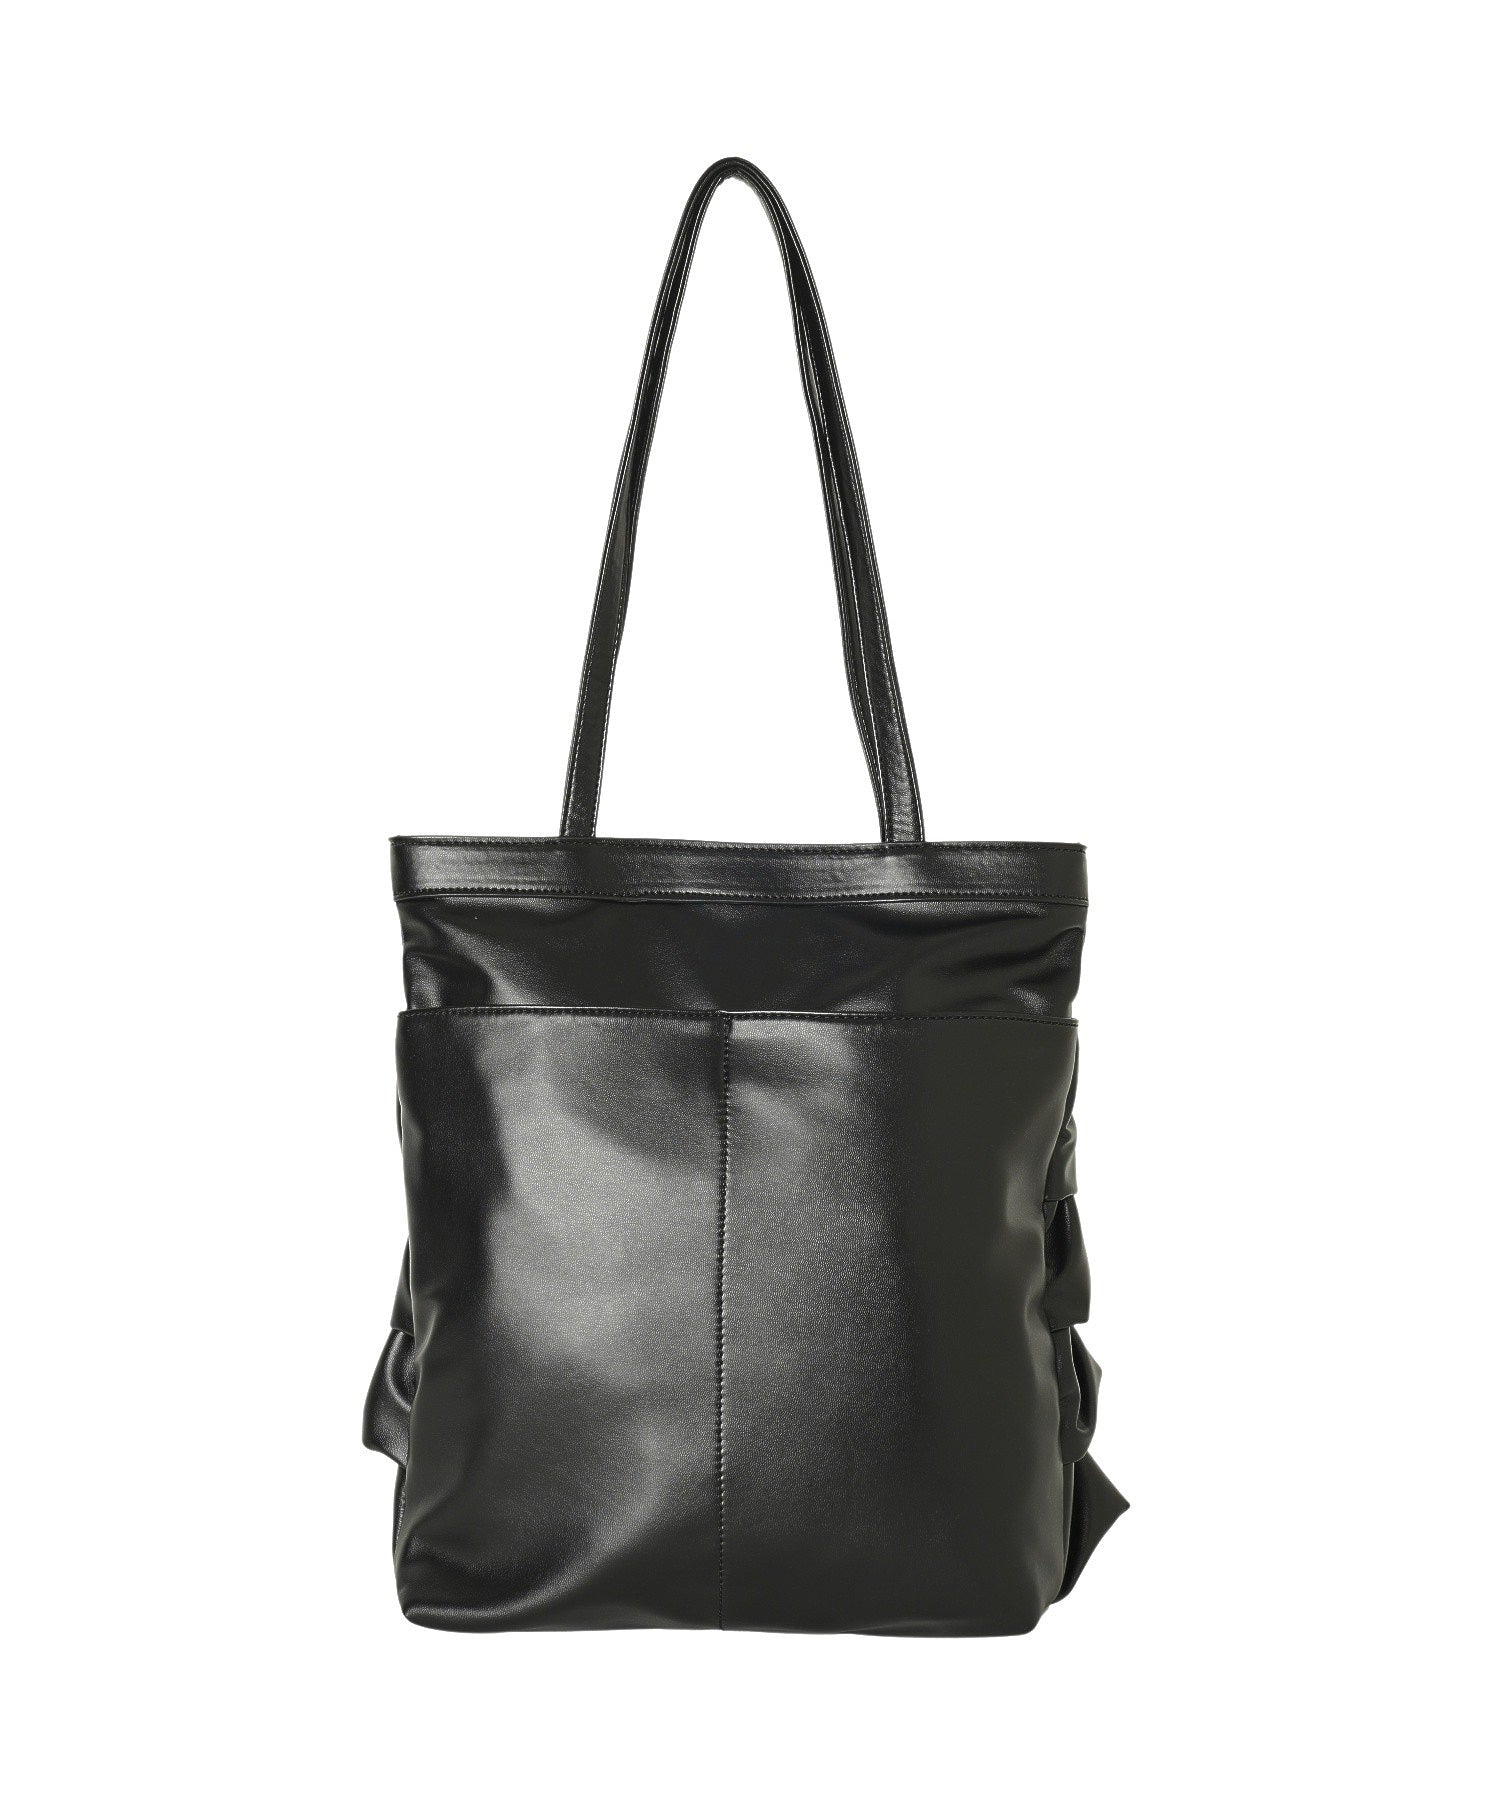 TIERED RUFFLE TOTE